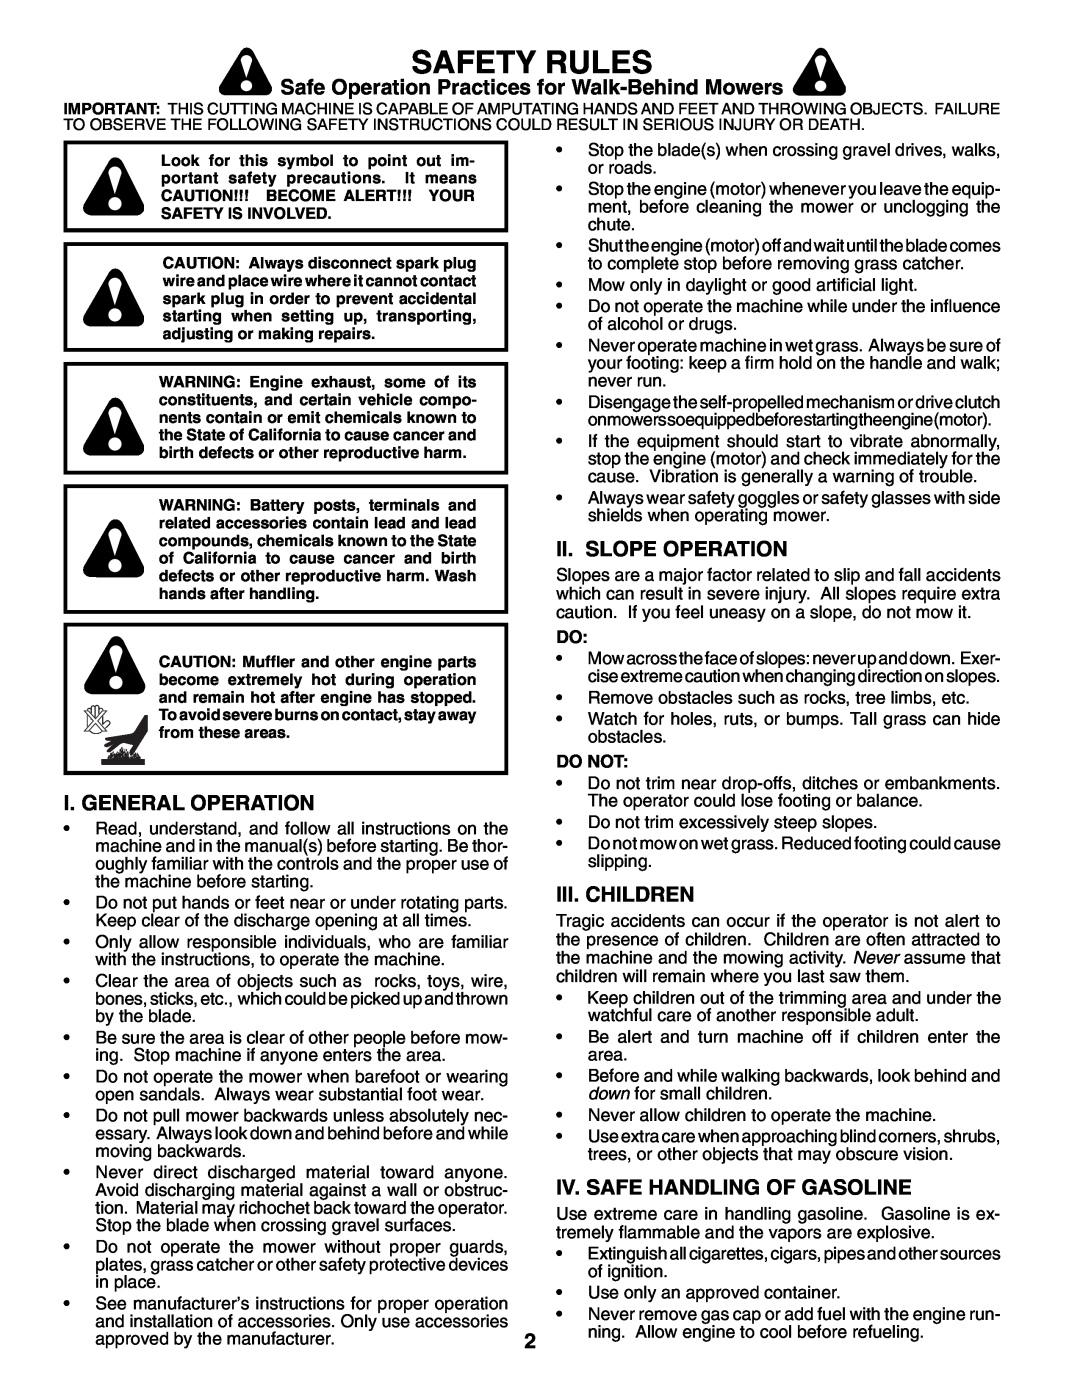 Husqvarna 65021CHV Safety Rules, Safe Operation Practices for Walk-Behind Mowers, Ii. Slope Operation, Iii. Children 